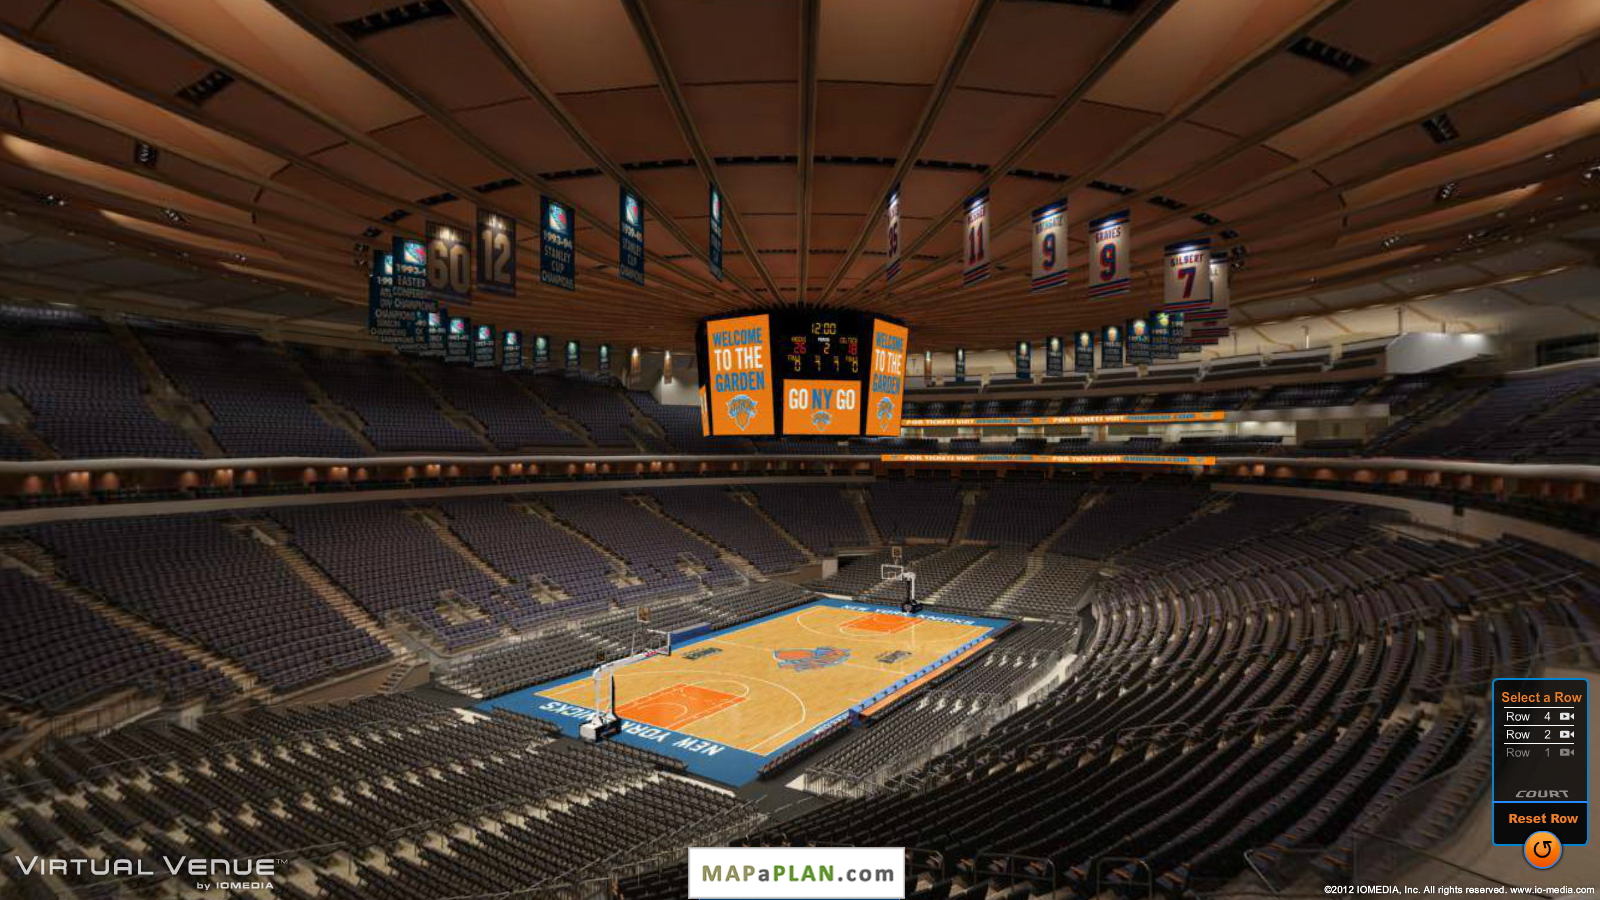 Madison Square Garden seating chart View from section 207